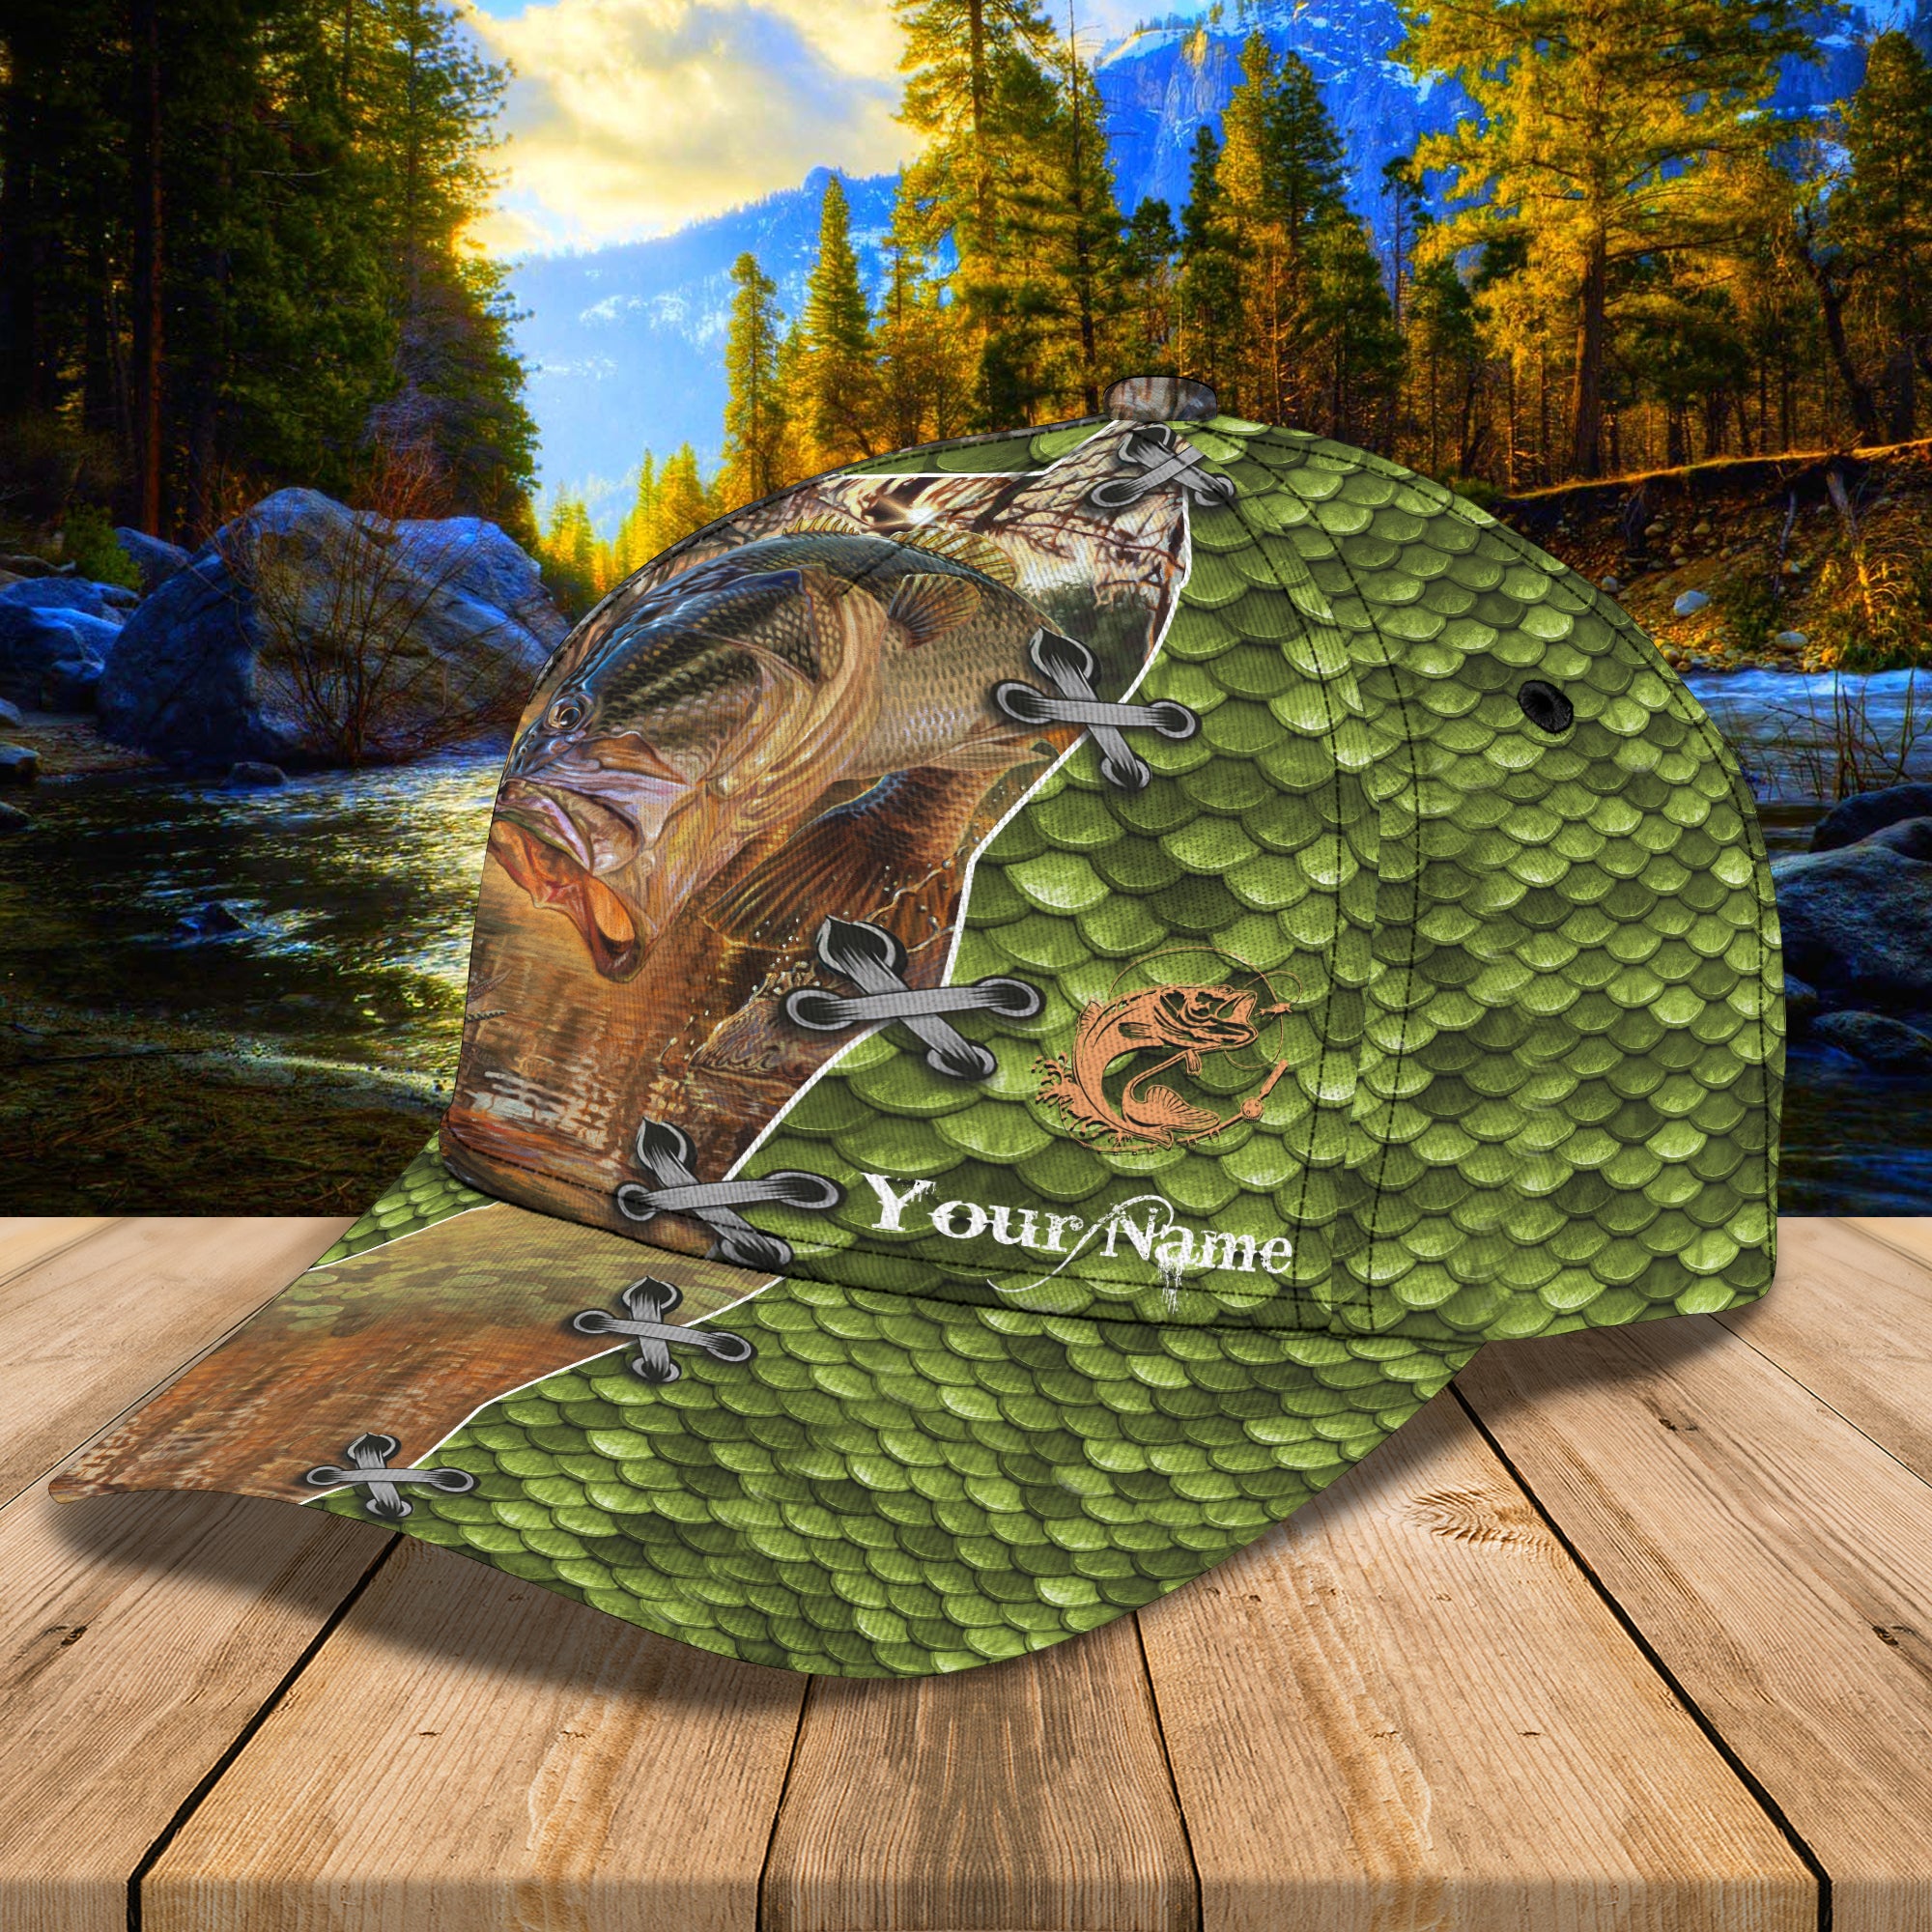 Fishing 02 - Personalized Name Cap - 16hb